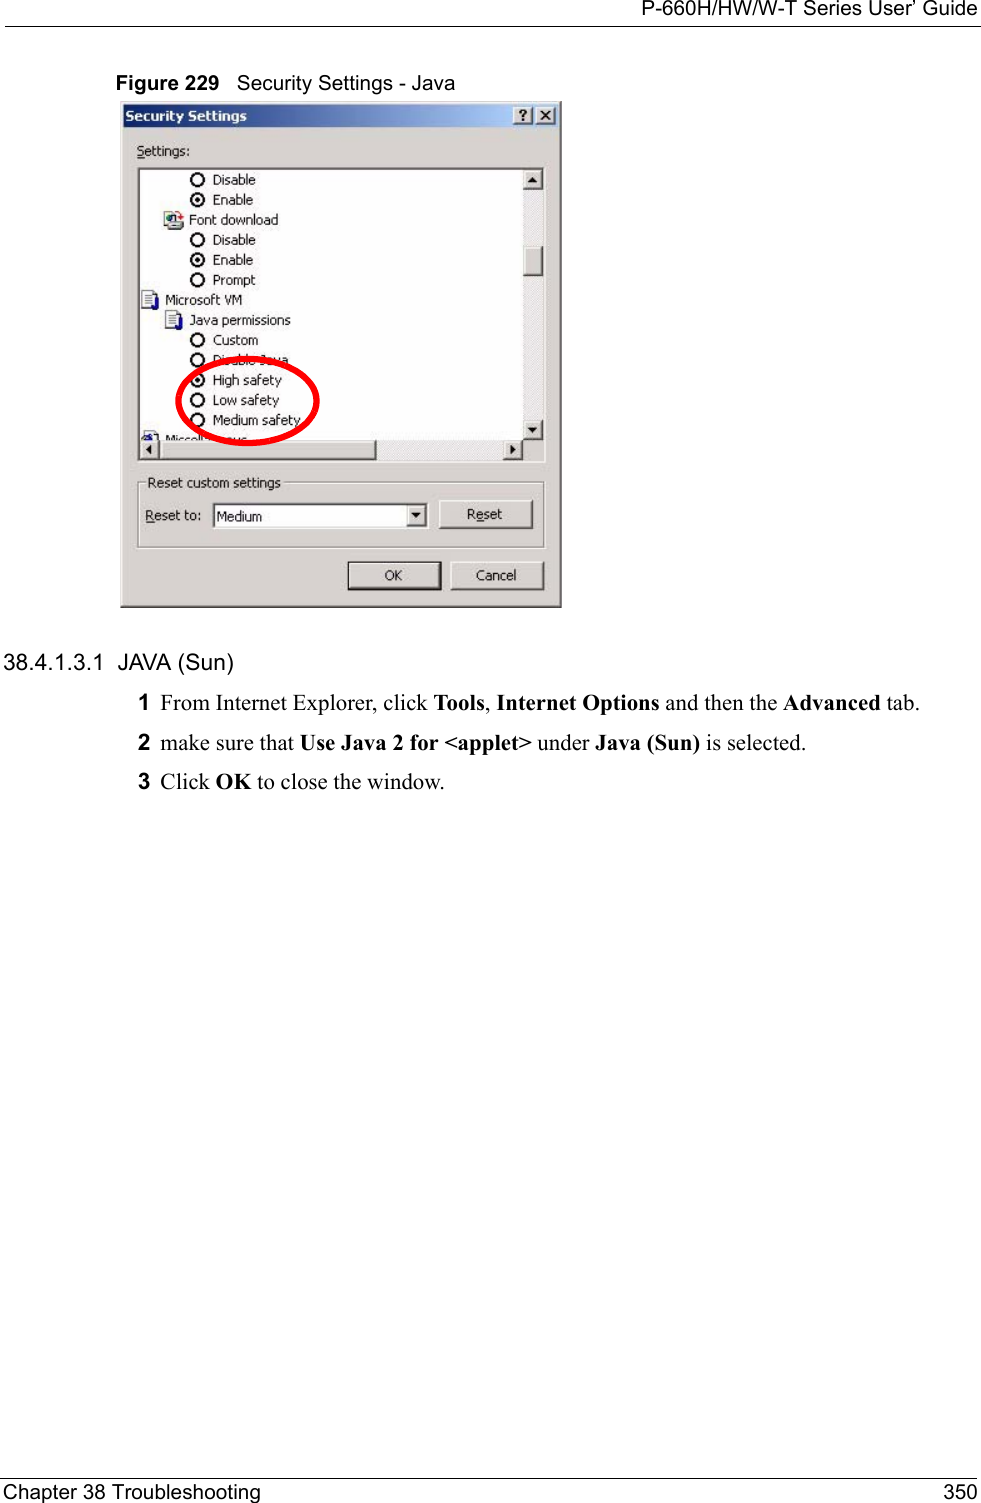 P-660H/HW/W-T Series User’ GuideChapter 38 Troubleshooting 350Figure 229   Security Settings - Java 38.4.1.3.1  JAVA (Sun)1From Internet Explorer, click Tools, Internet Options and then the Advanced tab. 2make sure that Use Java 2 for &lt;applet&gt; under Java (Sun) is selected.3Click OK to close the window.